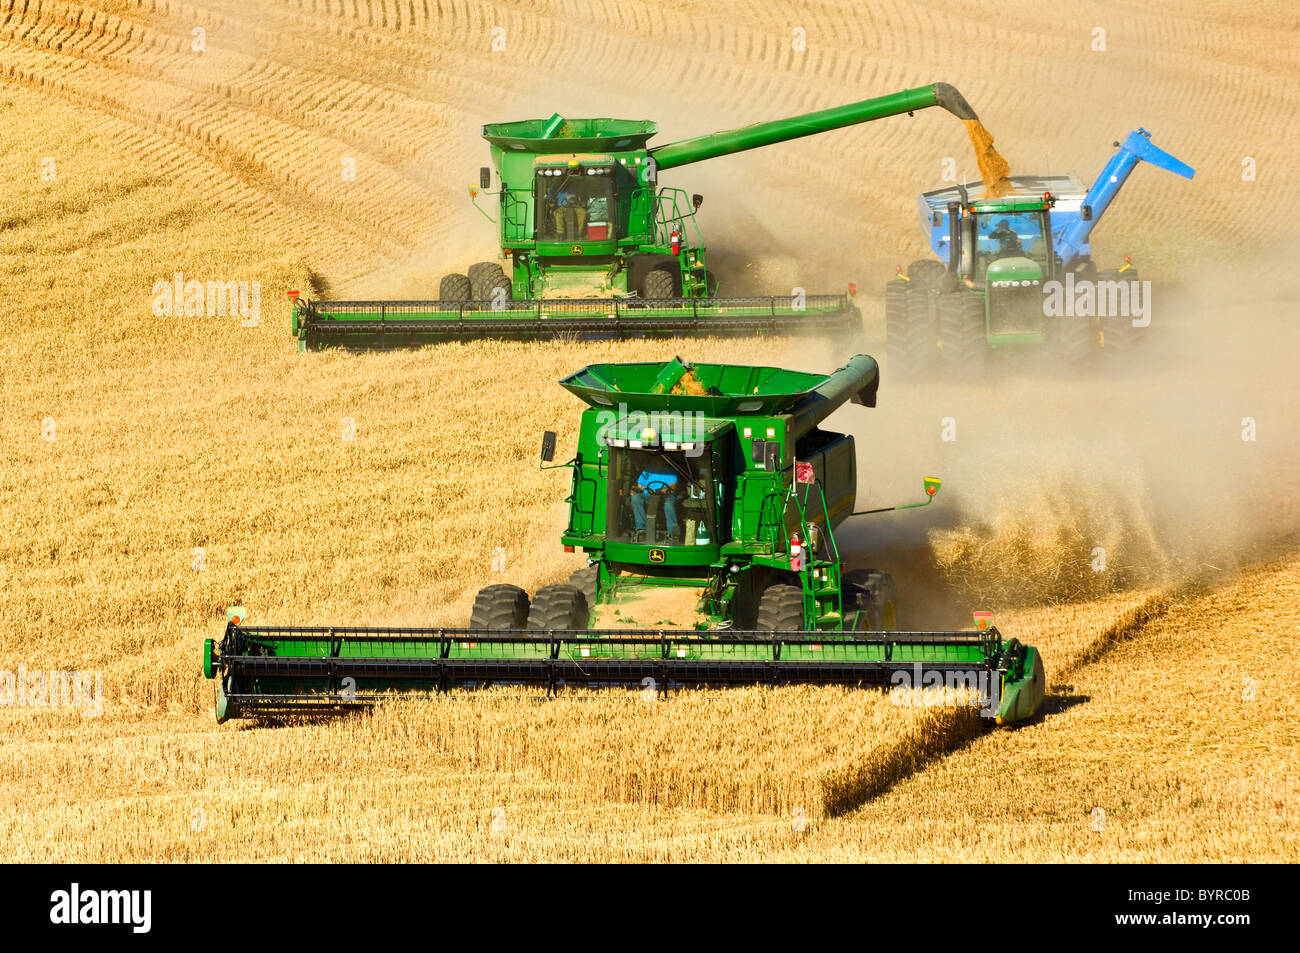 Two John Deere combines in tandem harvest wheat while one unloads into a grain cart “on-the-go” / near Pullman, Washington, USA. Stock Photo